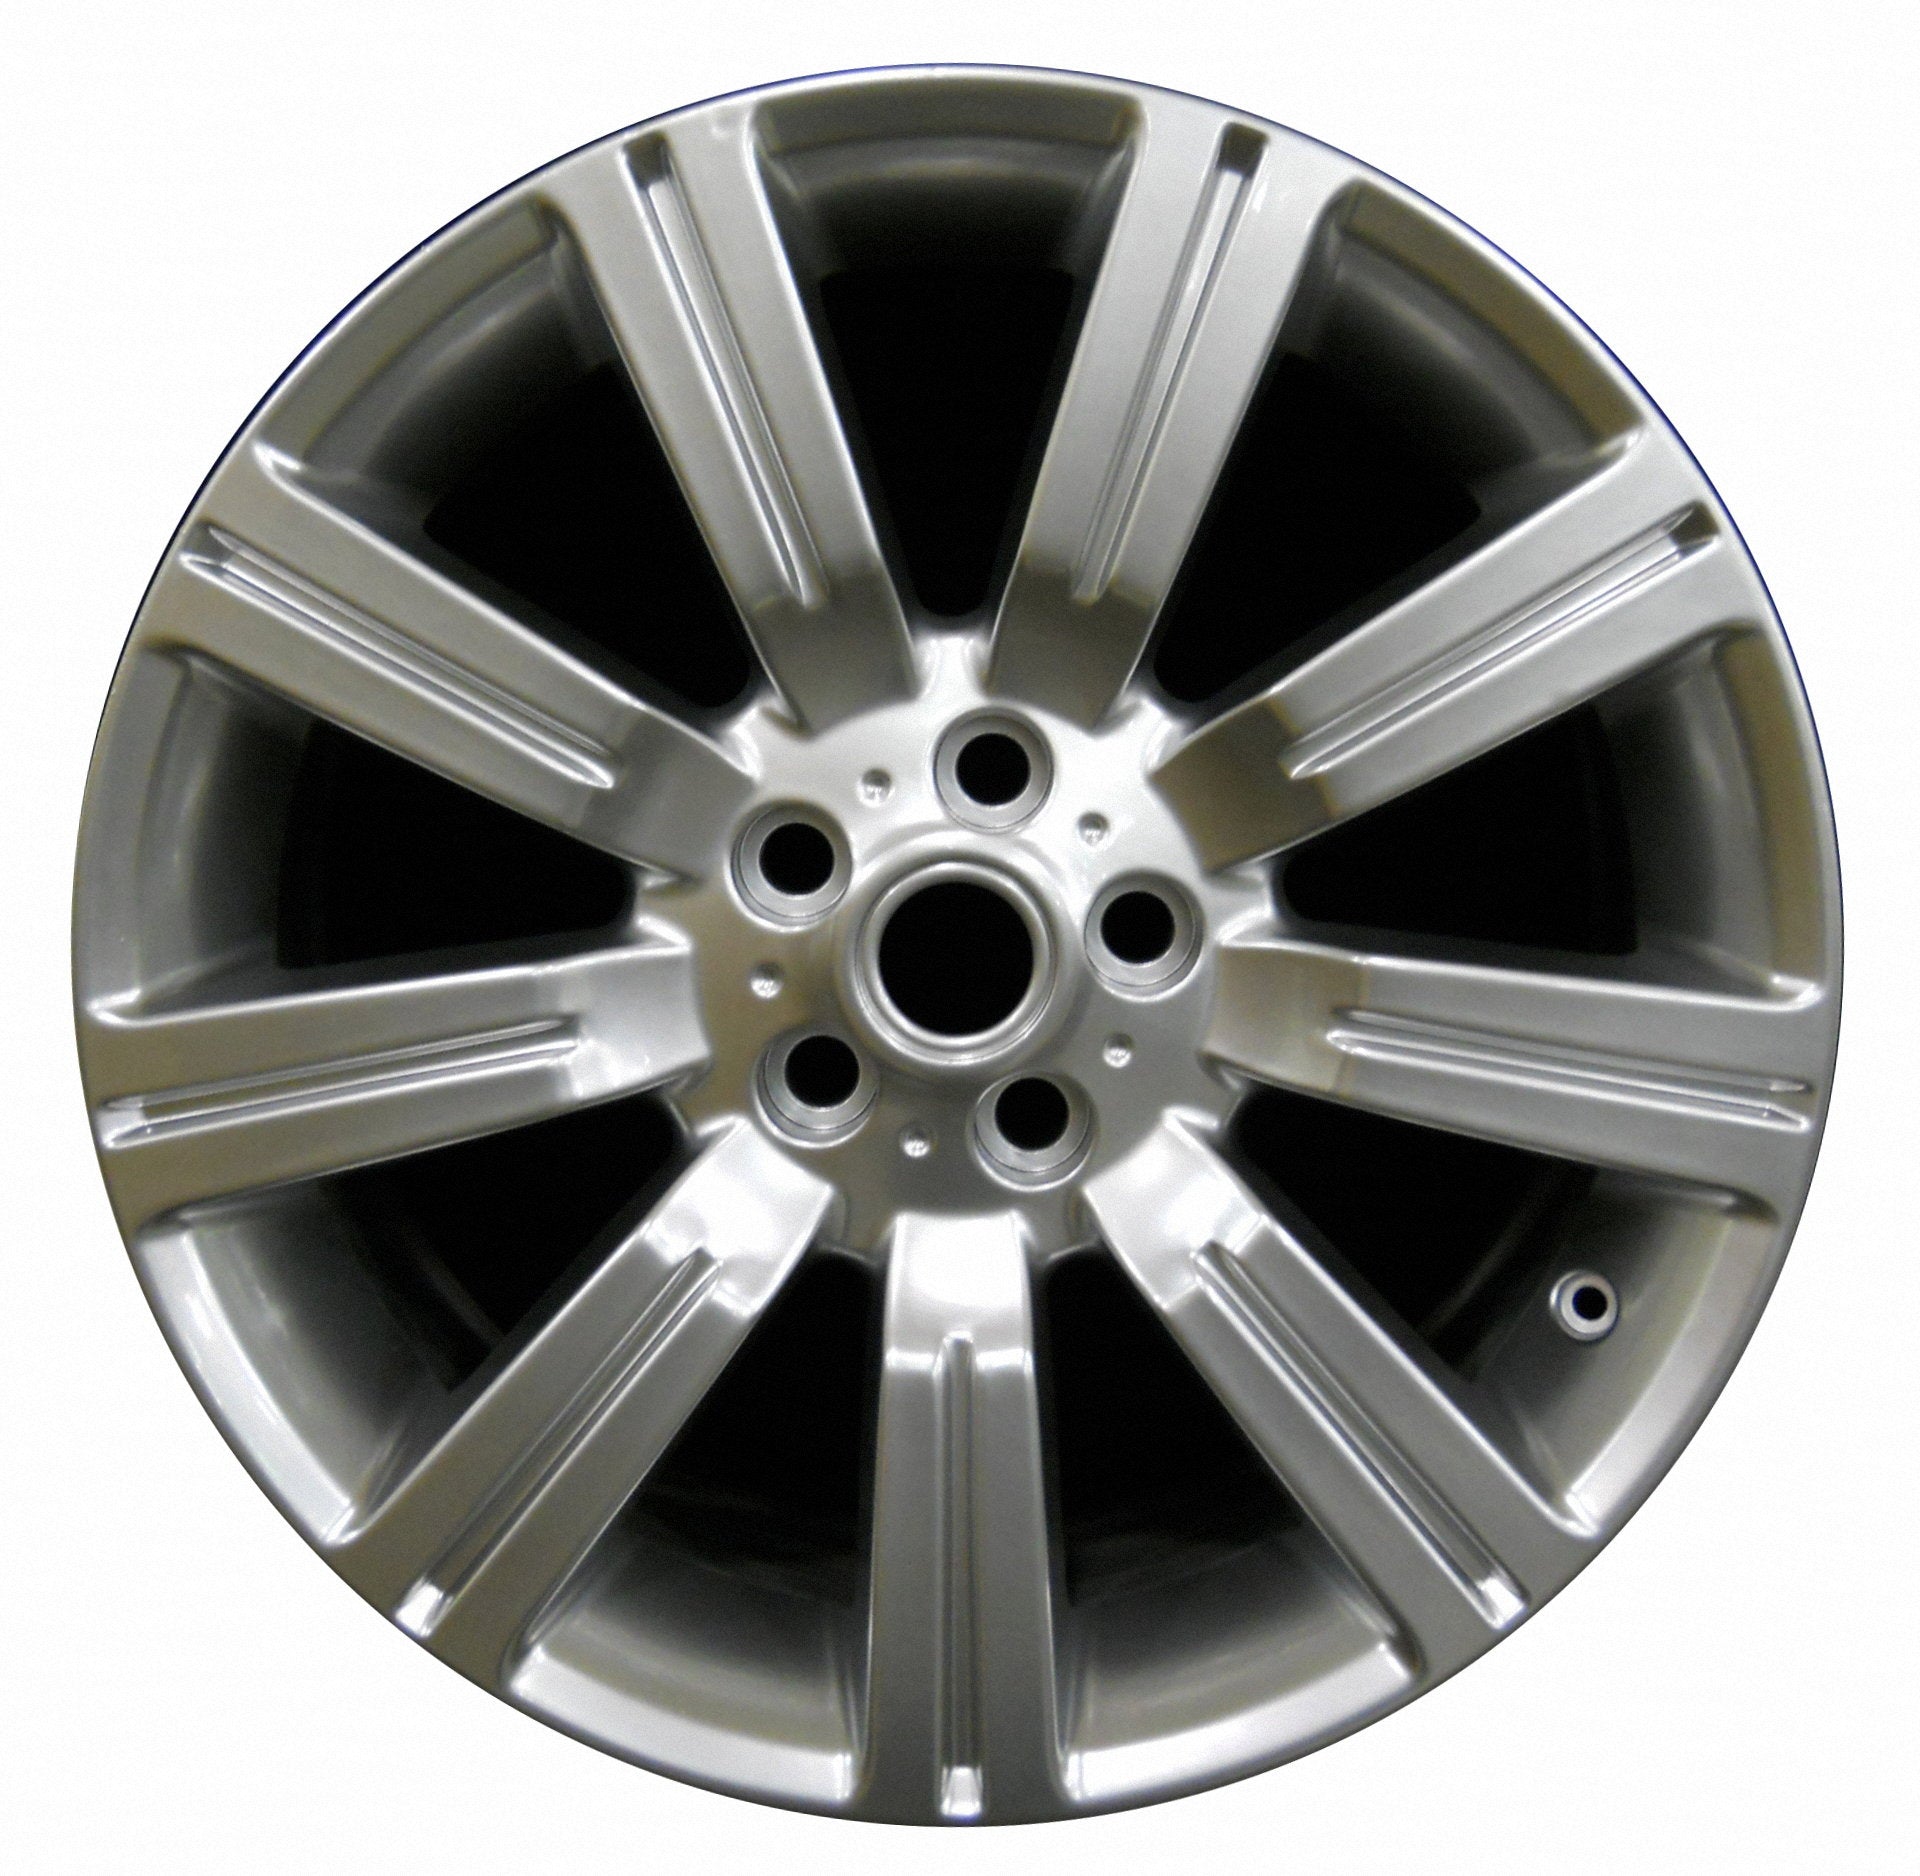 Land Rover Range Rover Sport  2005, 2006, 2007, 2008, 2009, 2010, 2011, 2012, 2013 Factory OEM Car Wheel Size 20x9.5 Alloy WAO.72200.HYPV1.FF